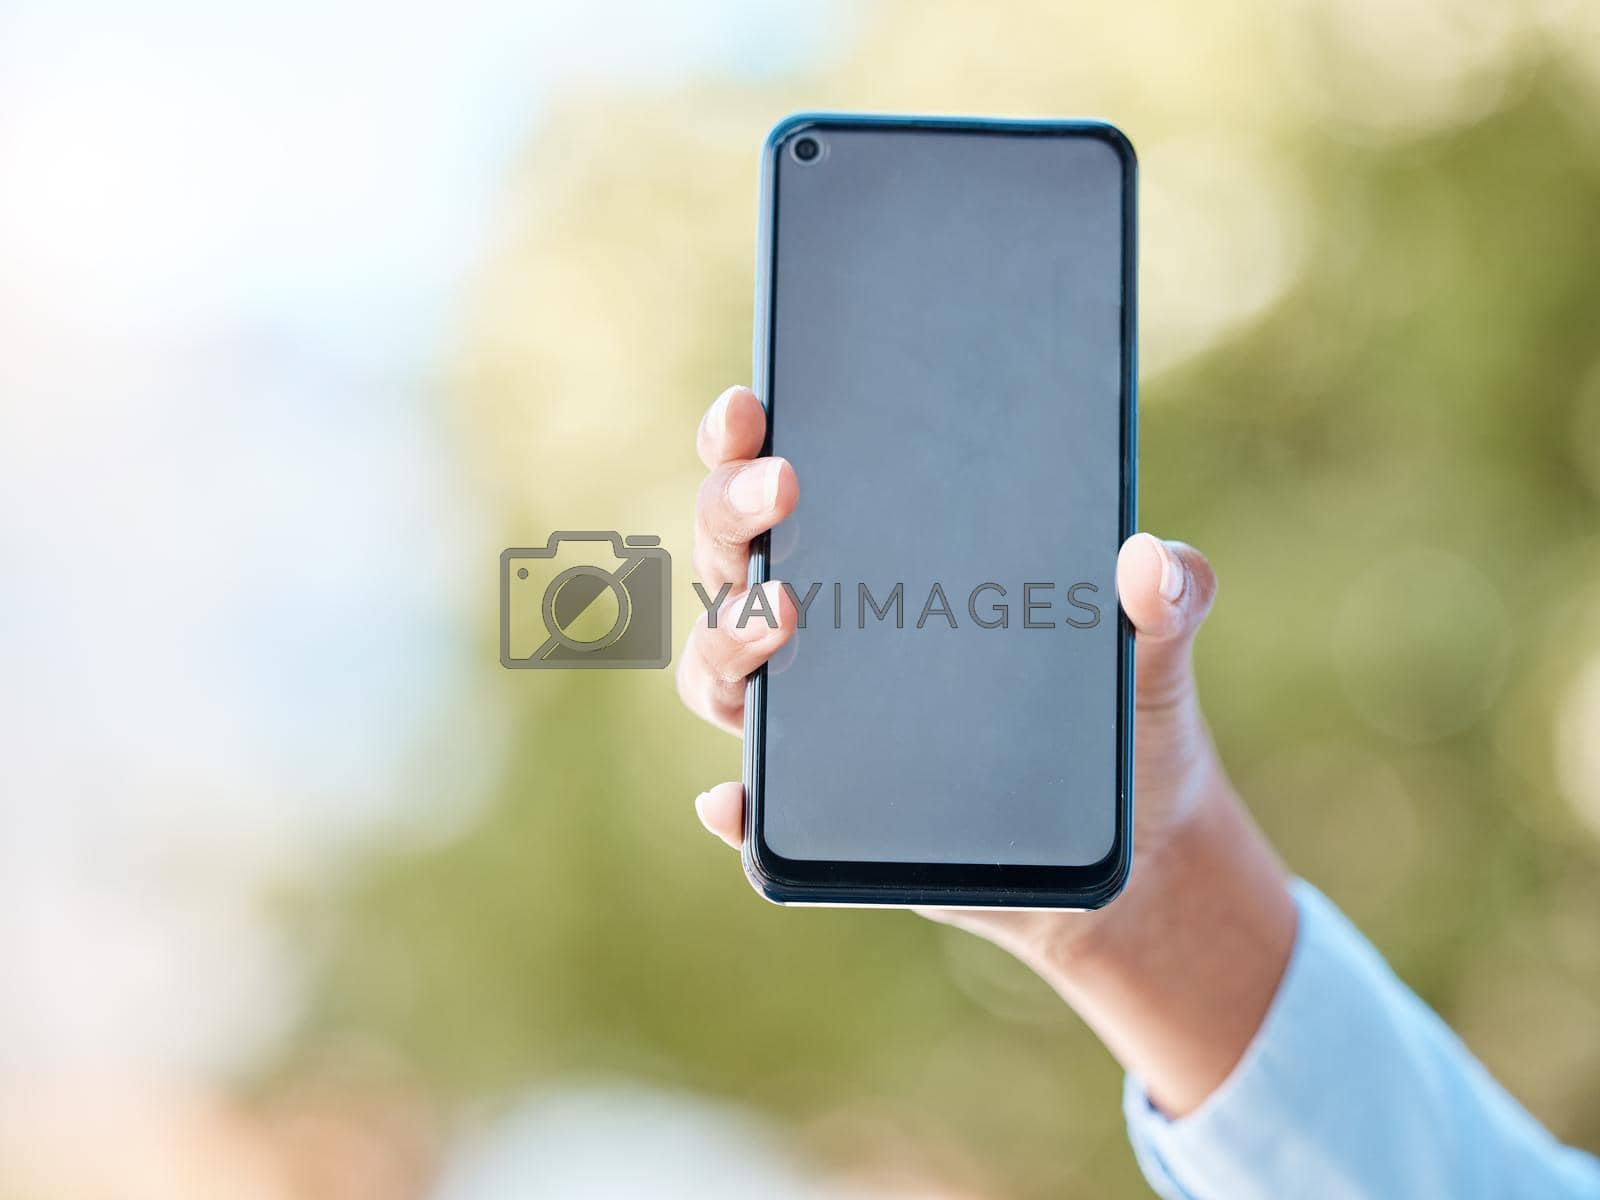 Hands, smartphone and presentation of mock up for digital app notification online with 5g tech. Person showing email, update glitch or social media communication response on blank screen